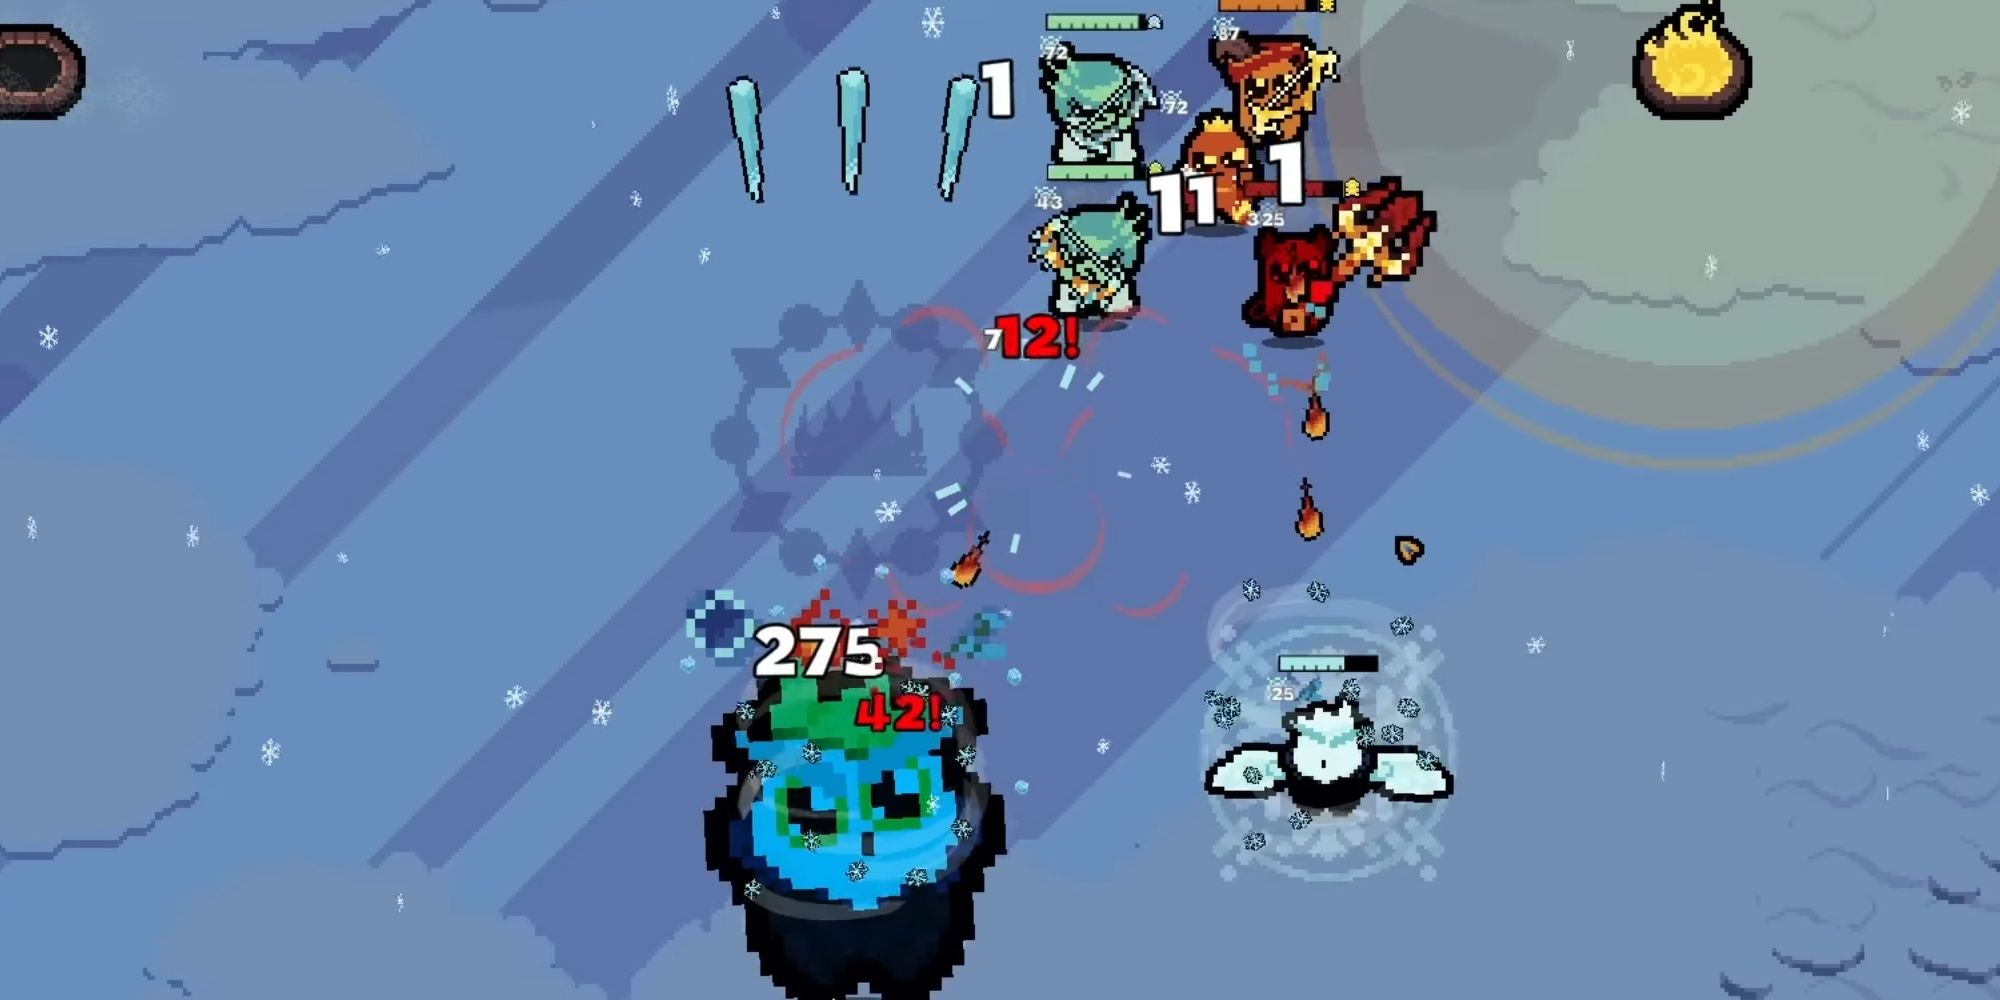 A squad fights a boss in the ice world in Just King